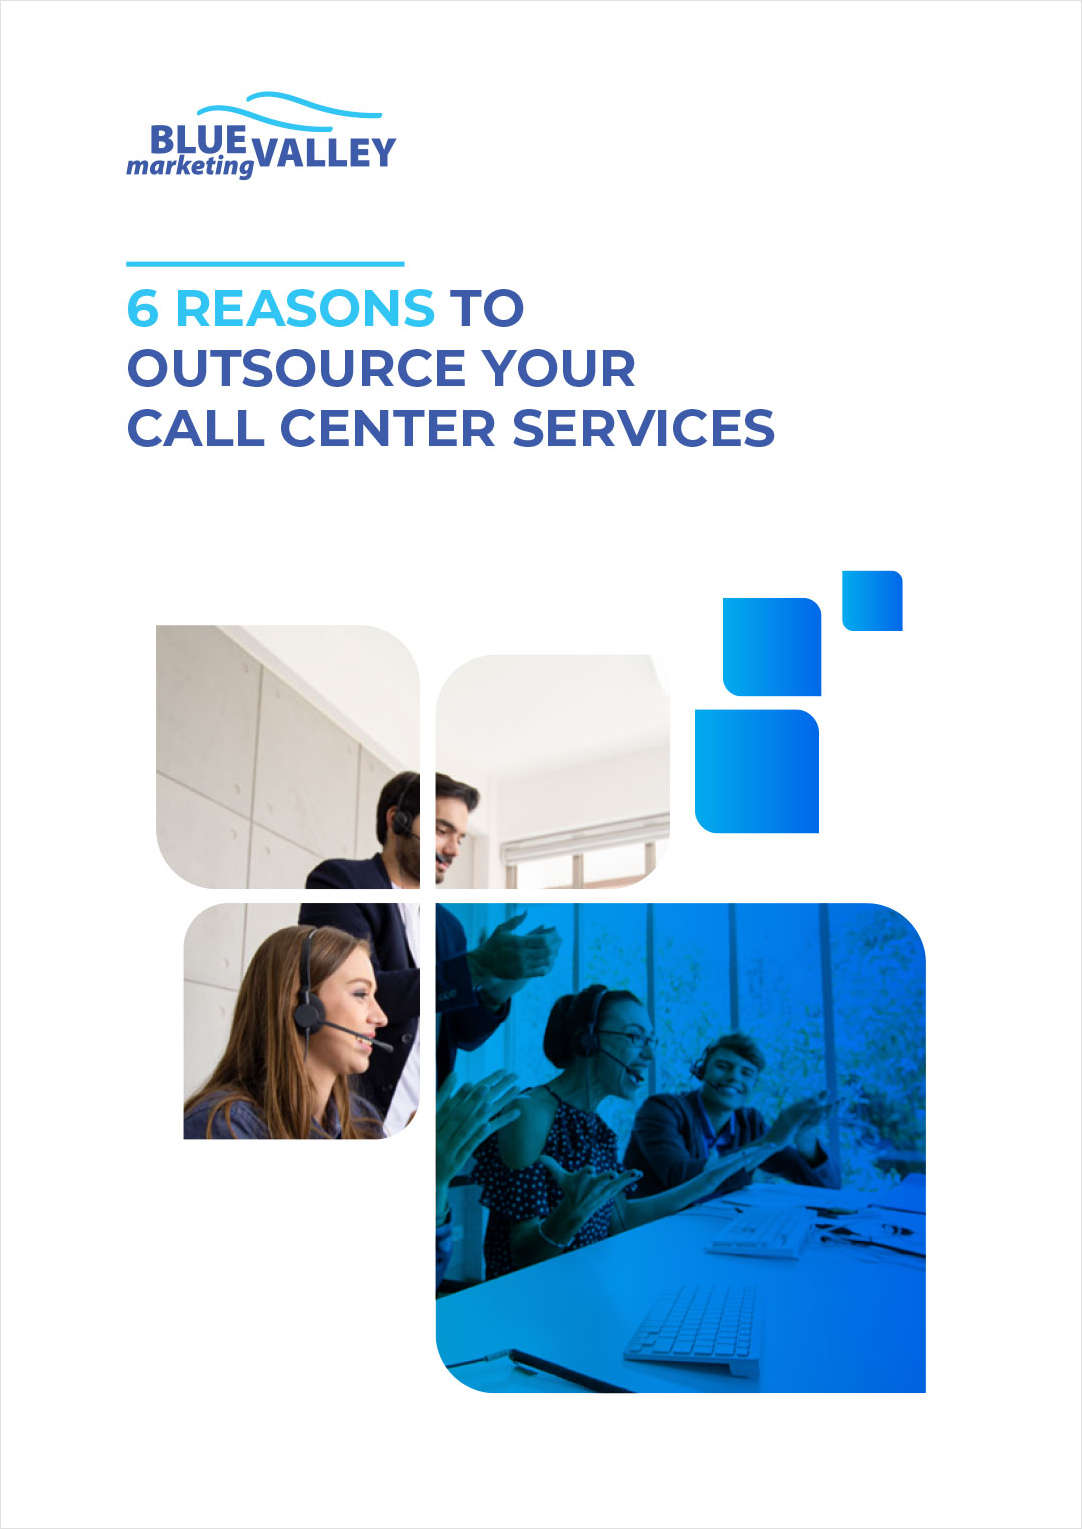 6 Reasons to Outsource Your Call Center Services